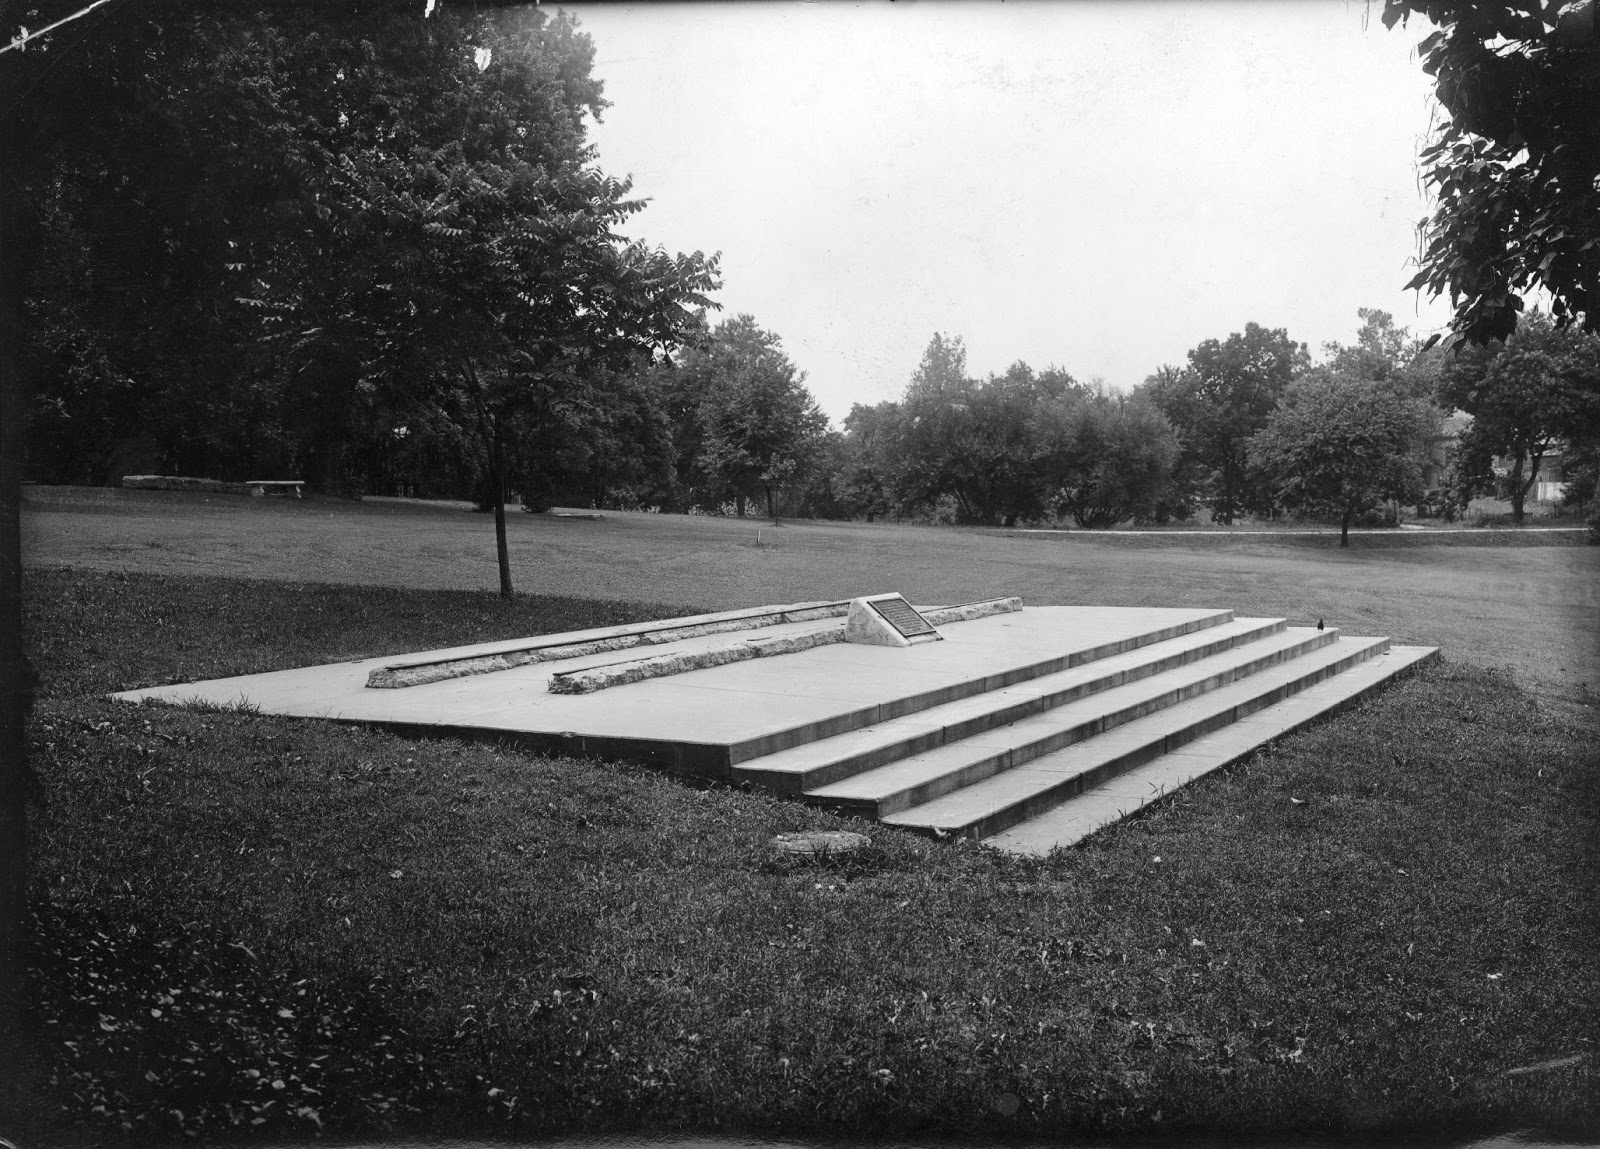 As part of the Silver Jubilee celebration of the College of Mechanical and Electrical Engineering (now part of UK College of Engineering) a monument to American railroad development was dedicated 10 a.m., May 30, 1916. The monument consisted of a restoration of a portion of the original track of the Lexington and Ohio Railroad, the first railroad built west of the Allegheny Mountains. Photo courtesy of UK Special Collections.